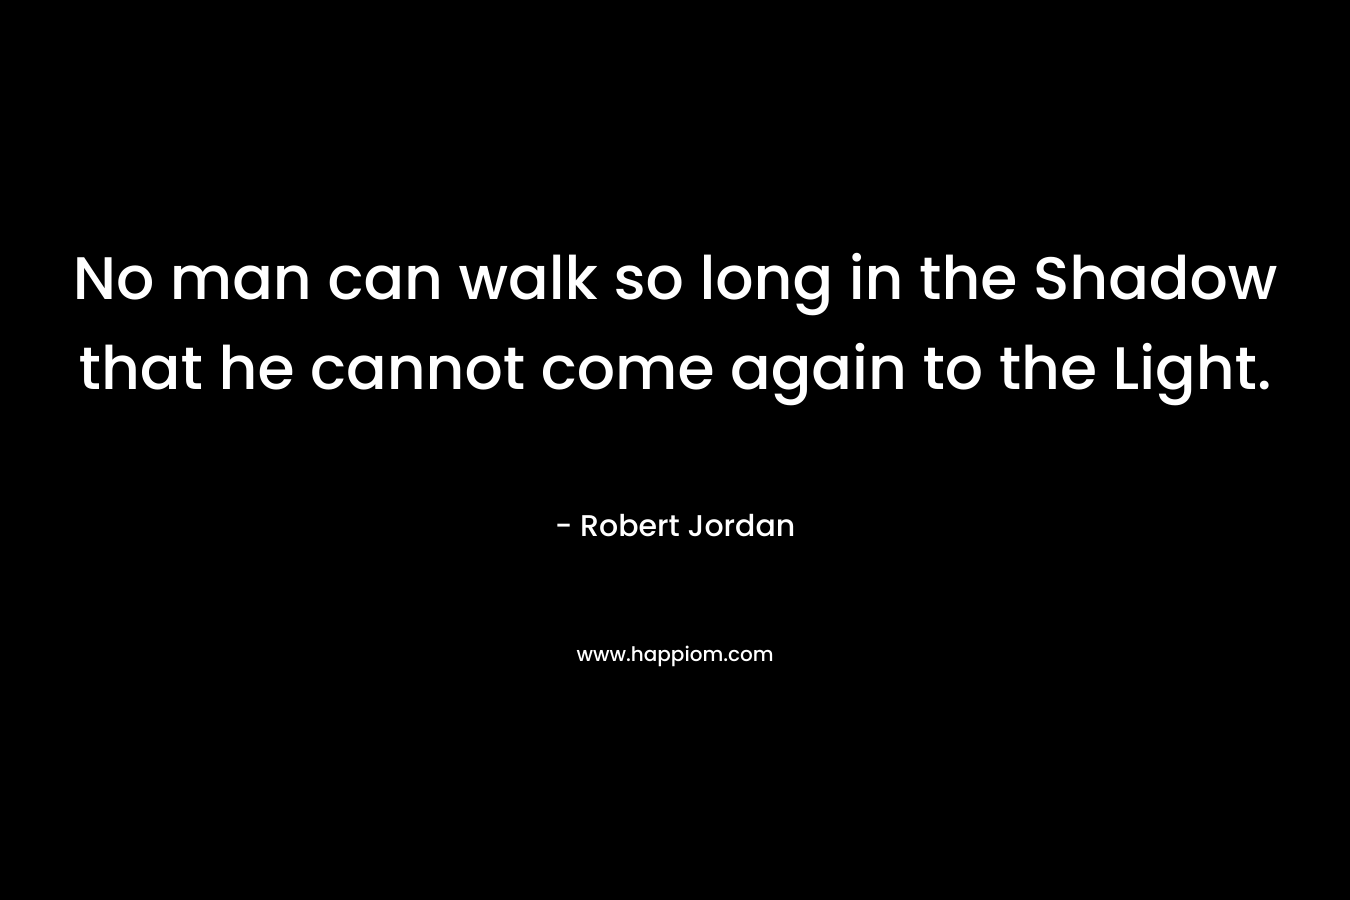 No man can walk so long in the Shadow that he cannot come again to the Light.